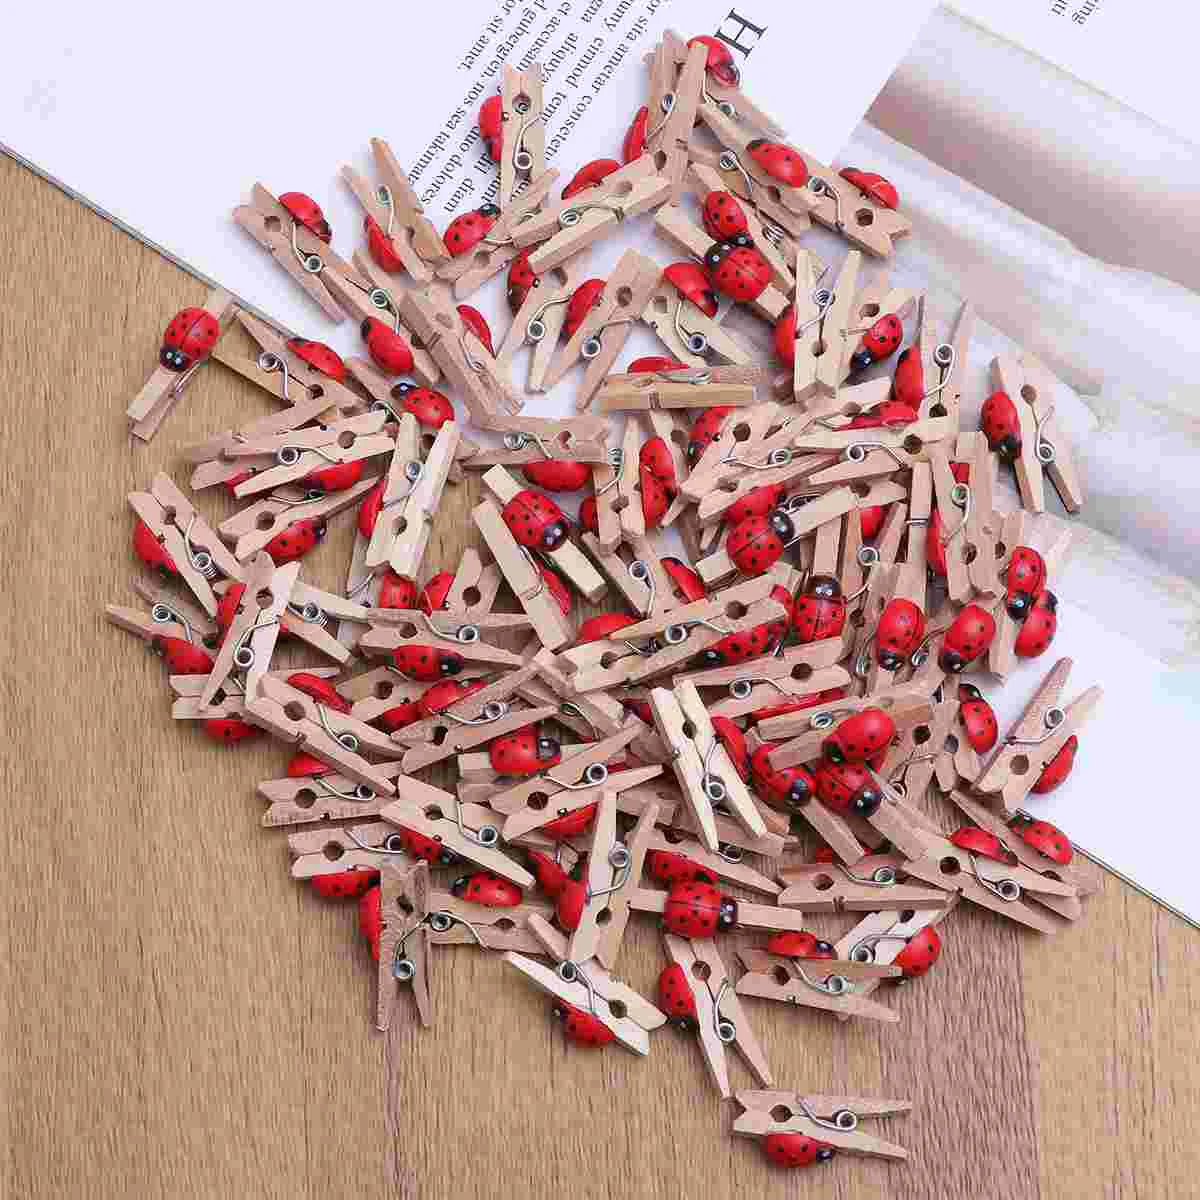 

100Pcs Lovely Wooden Pegs Handmade Red Beetle Photo Clips Note Memo Holder Craft Clips Ornaments Snack Clips for Party Favor